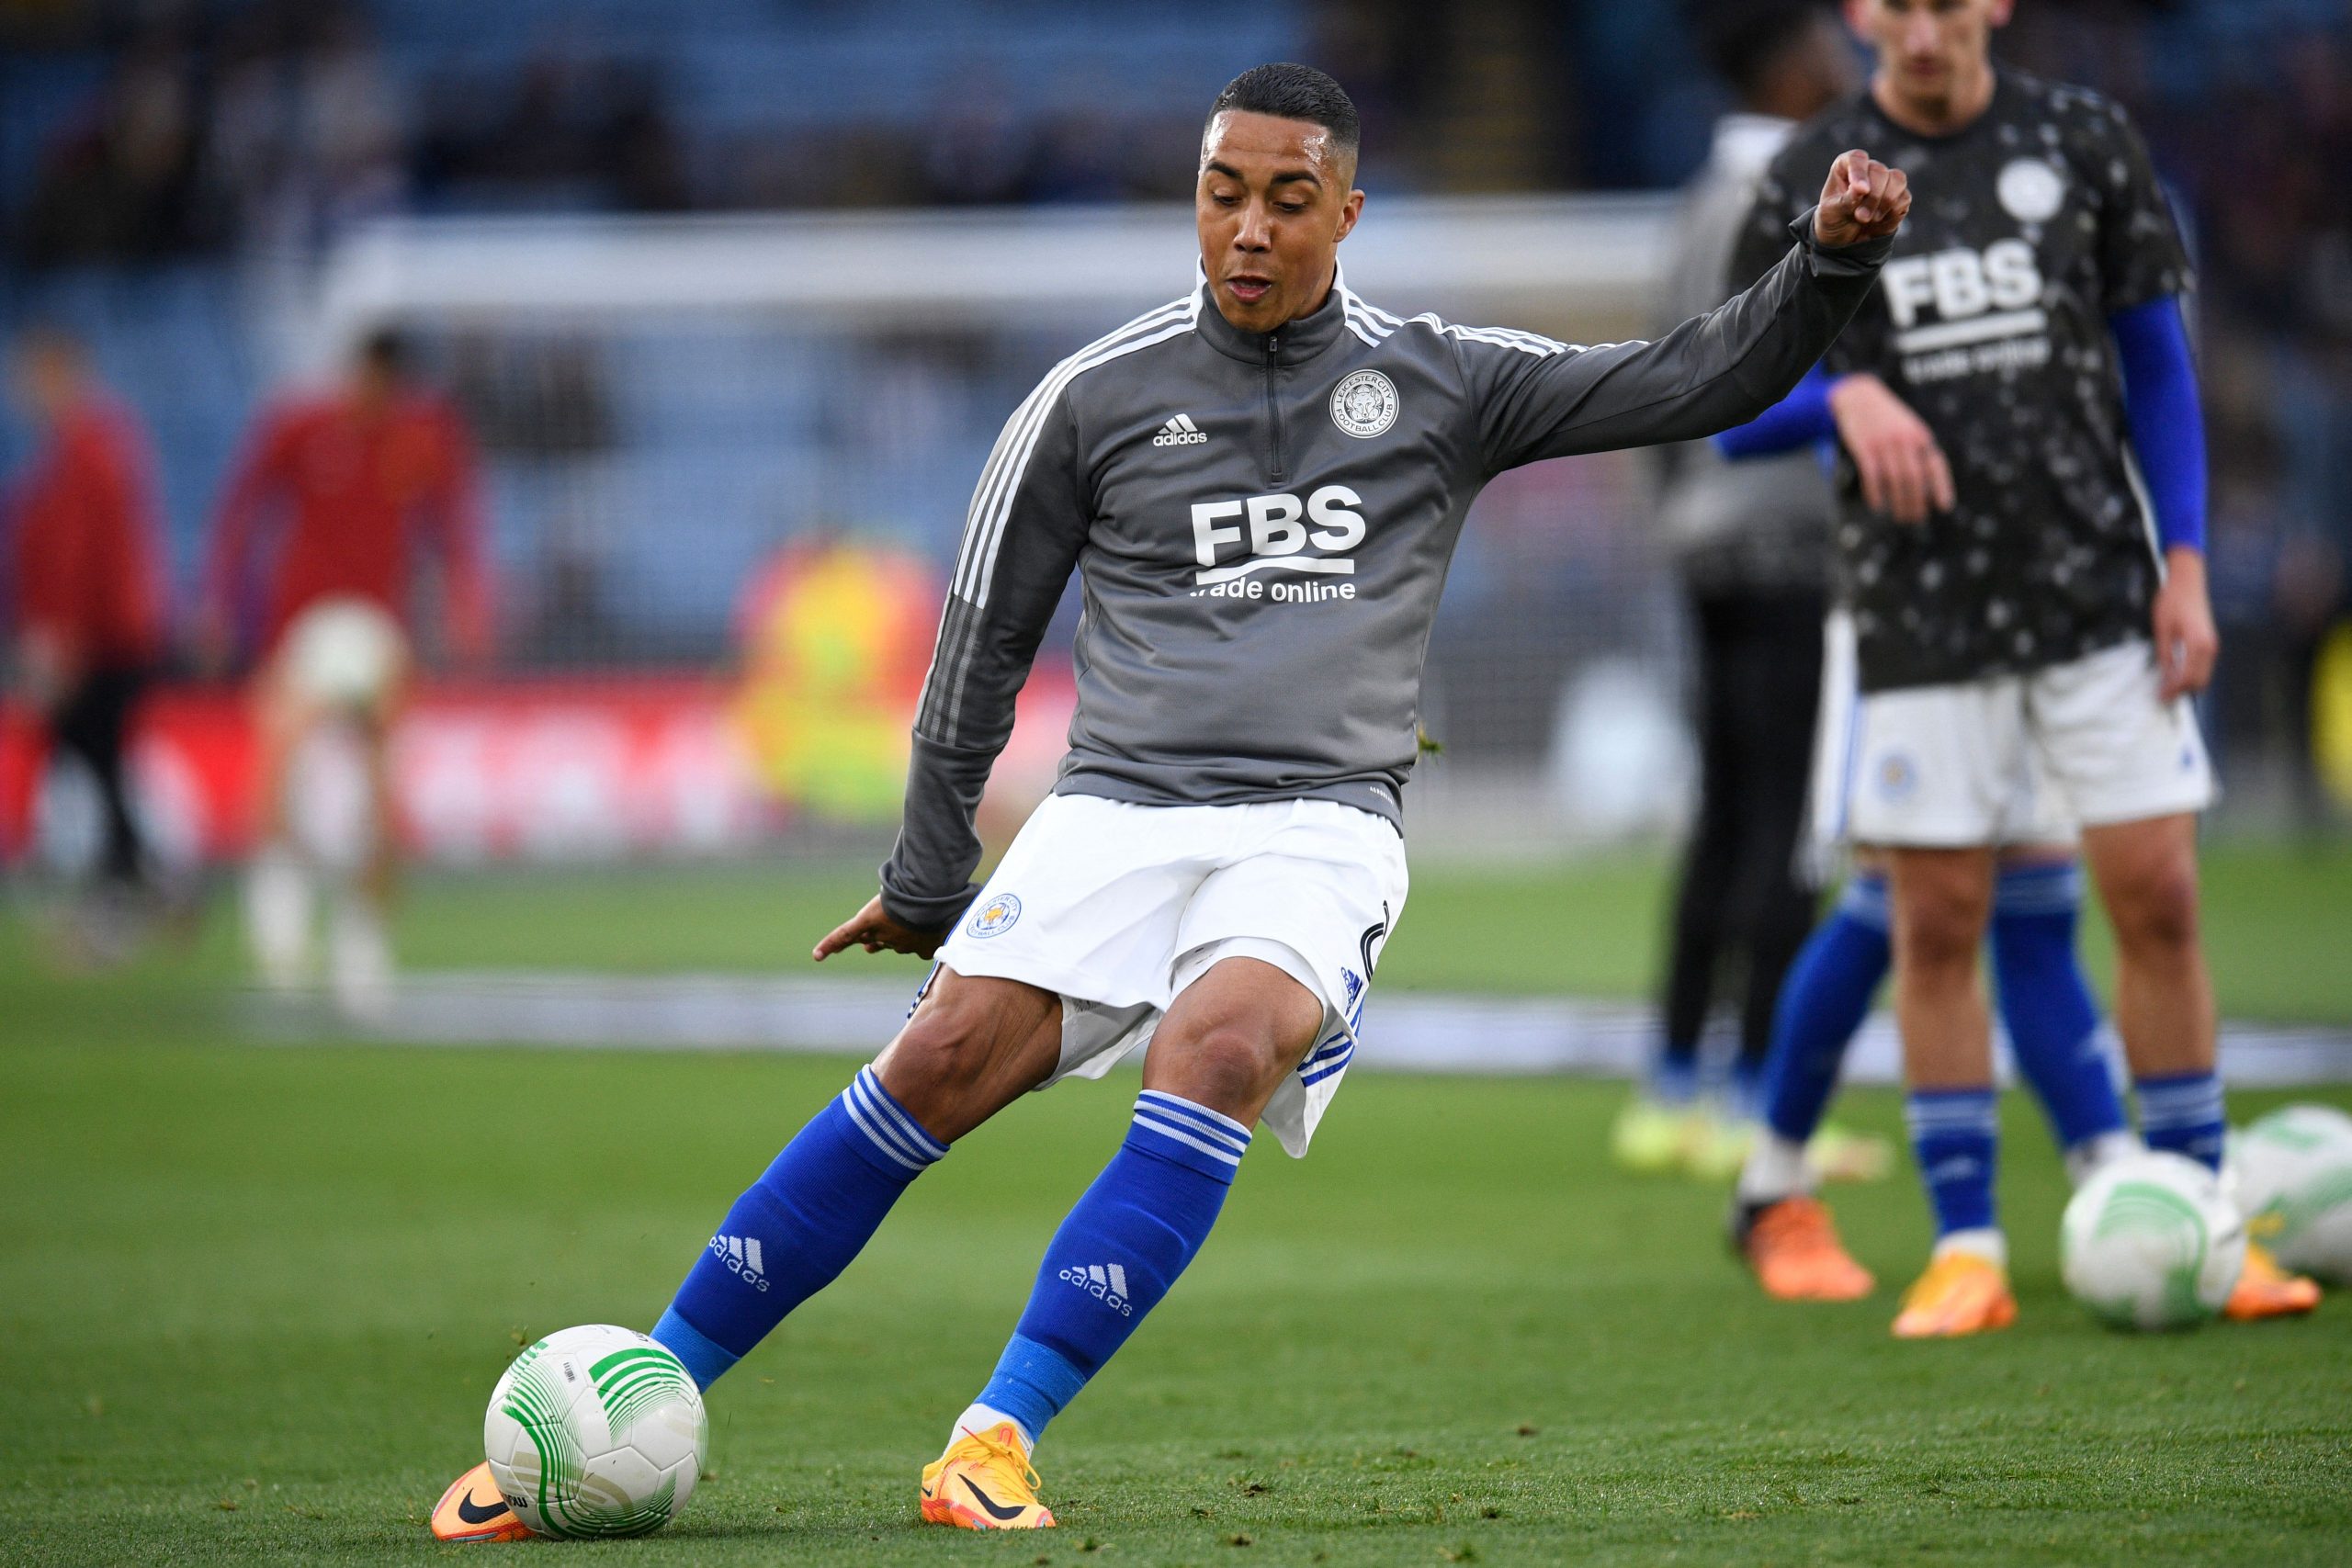 Leicester City (Youri Tielemans)